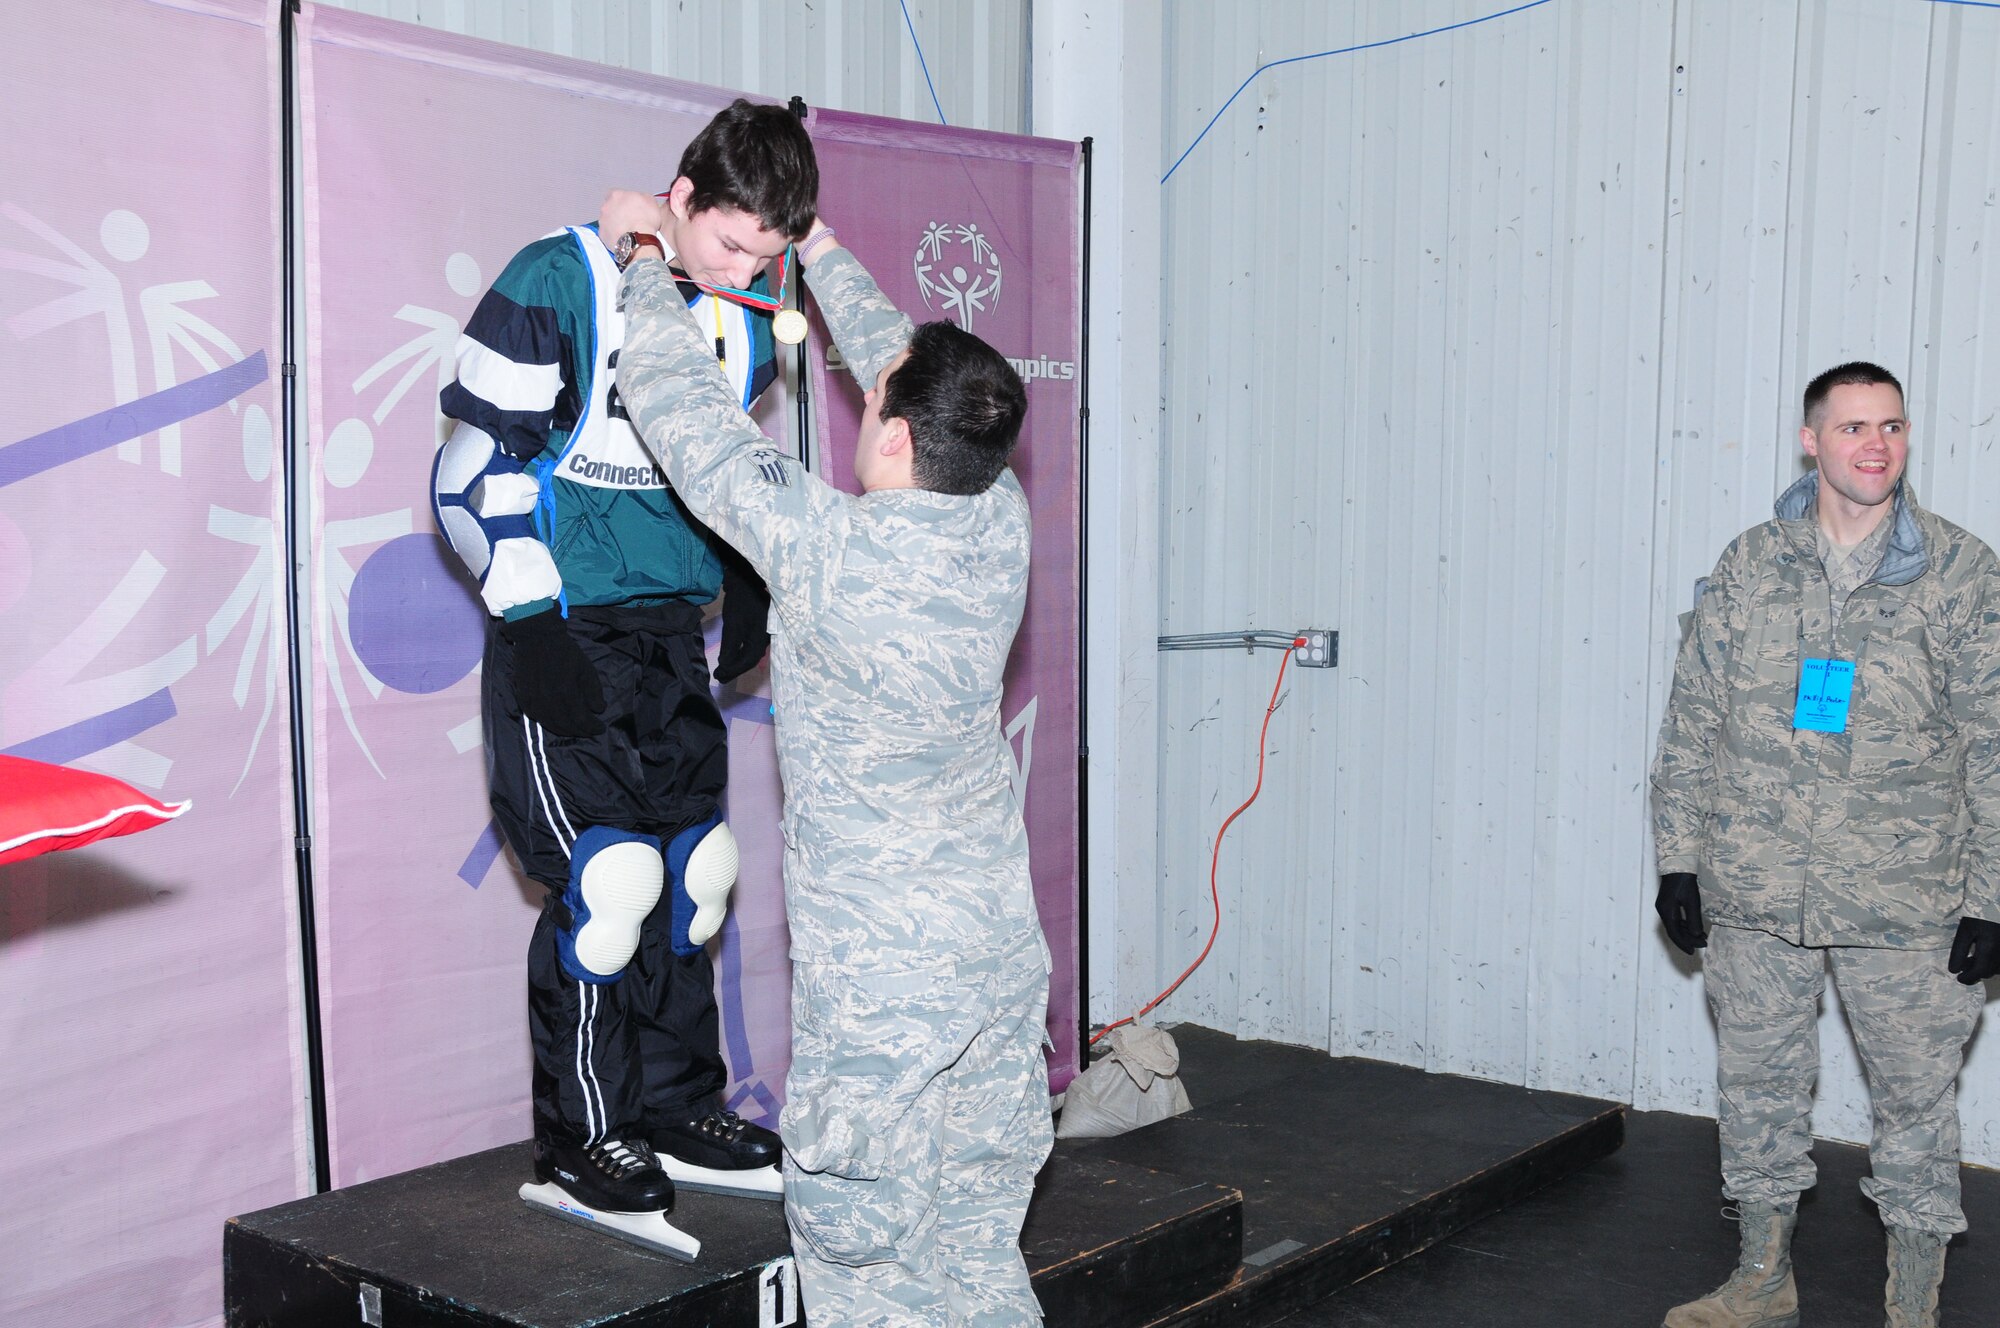 Senior Airman Christopher Keogan of the 103rd Air Operations Group awards a medalist at the Special Olympics March 4, 2012, held at the international skating center in Simsbury, Conn. Several members of the Connecticut Air National Guard volunteered to help staff the event. (U.S. Air Force photo by Airmen 1st Class Emmanuel Santiago/Released)